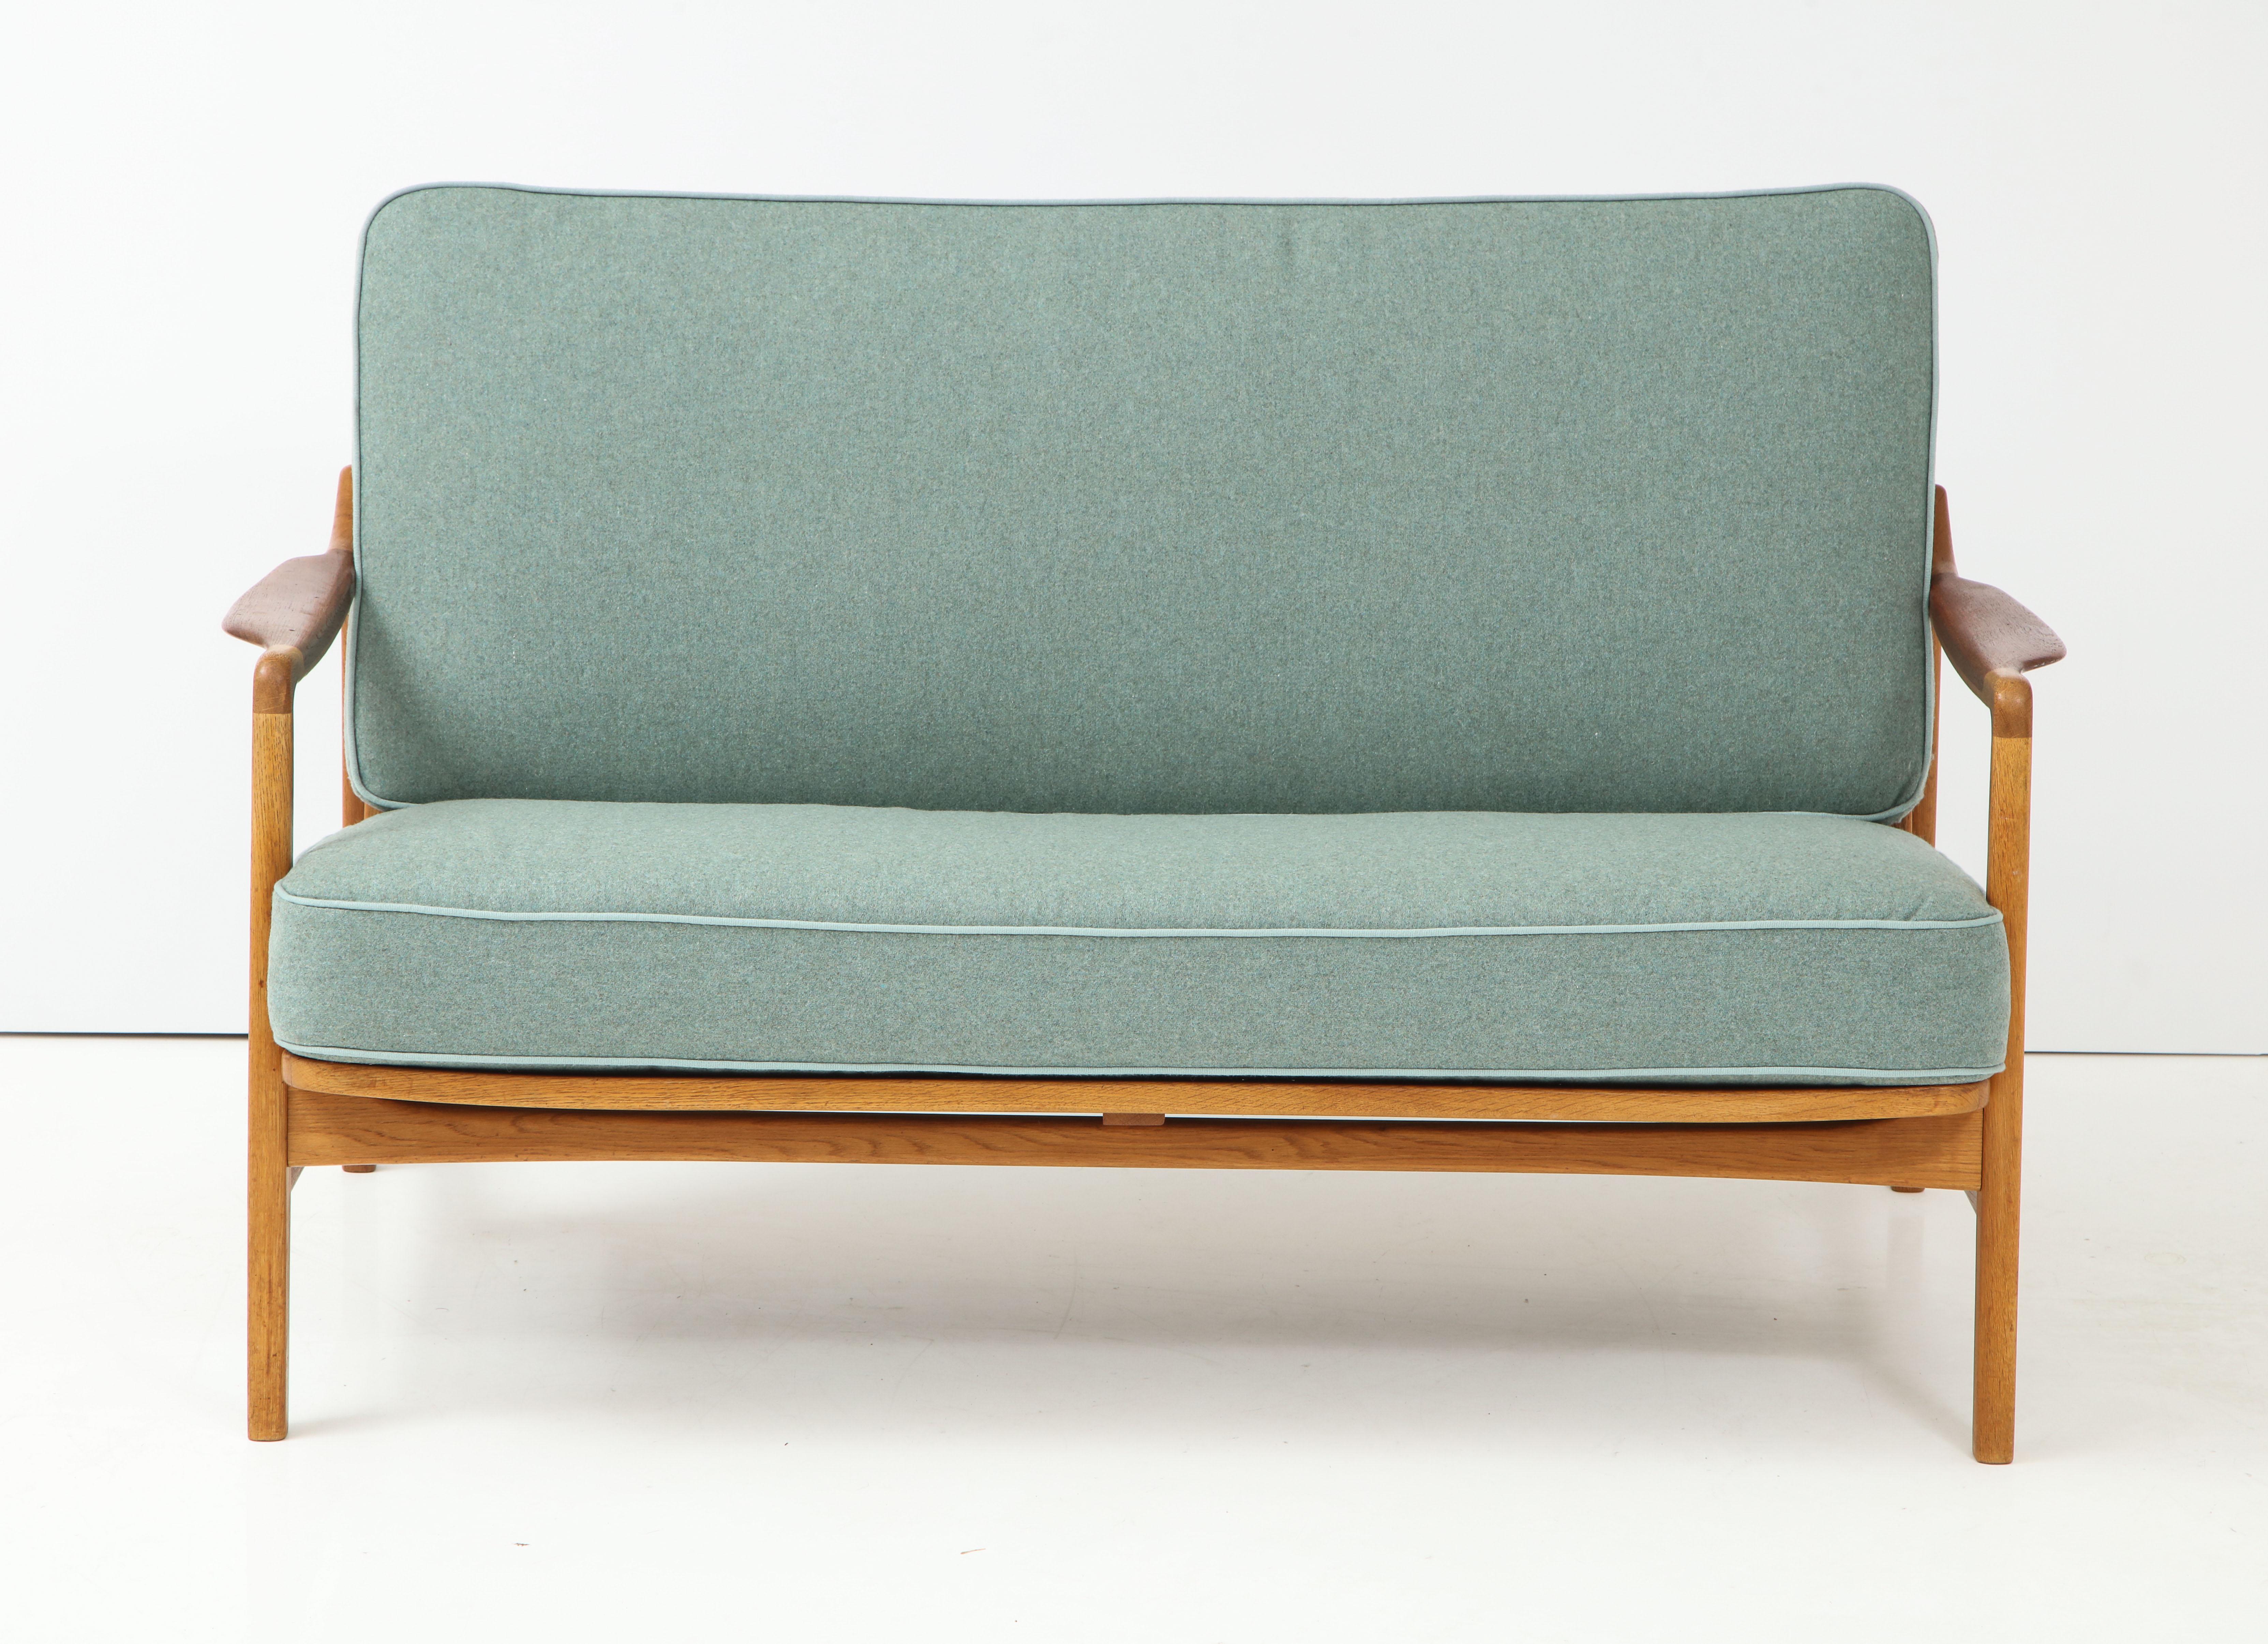 A Danish design teak and oak two person settee, Designed by Tove and Edvard Kindt-Larsen, circa 1950s, Model 117. Settee can be disassembled without the use of tools. Re-upholstered in wool upholstery. Nice patina.
   